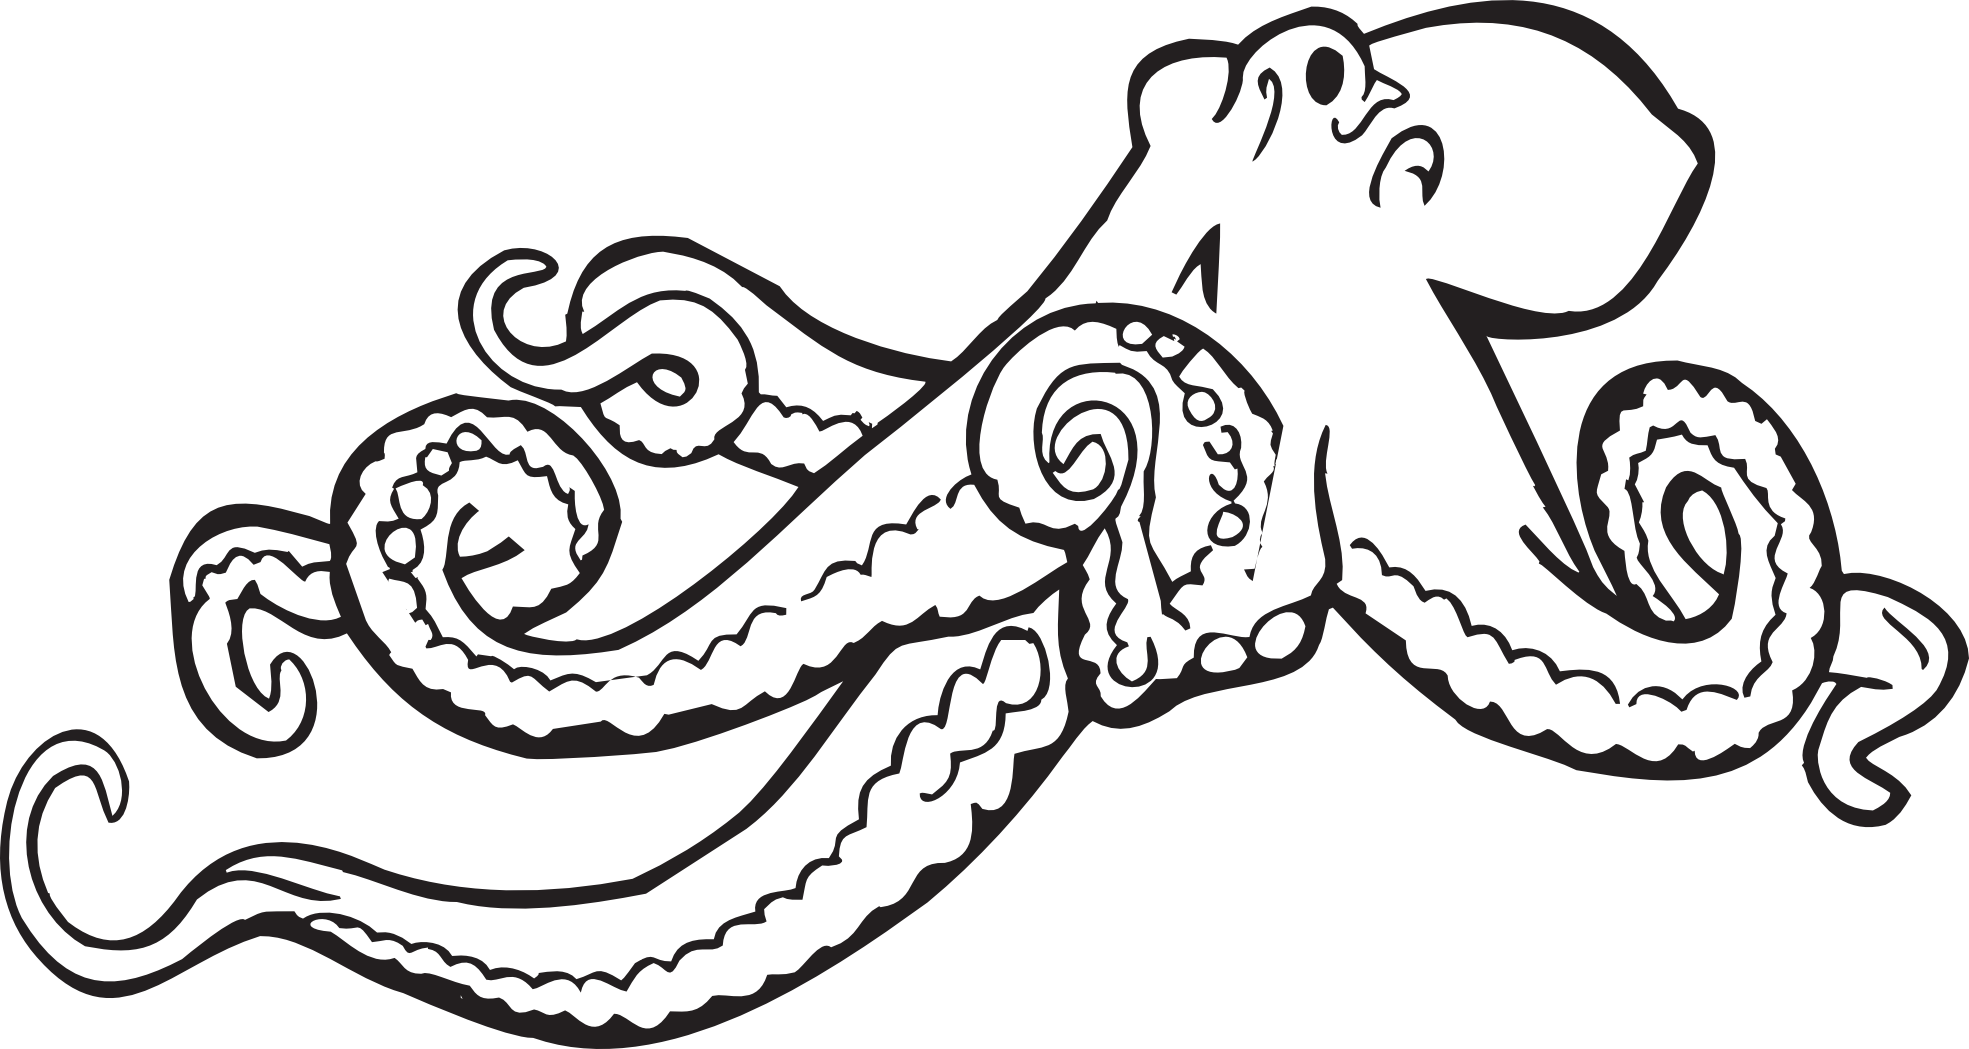 Octopus Clip Art Black And White   Clipart Panda   Free Clipart Images